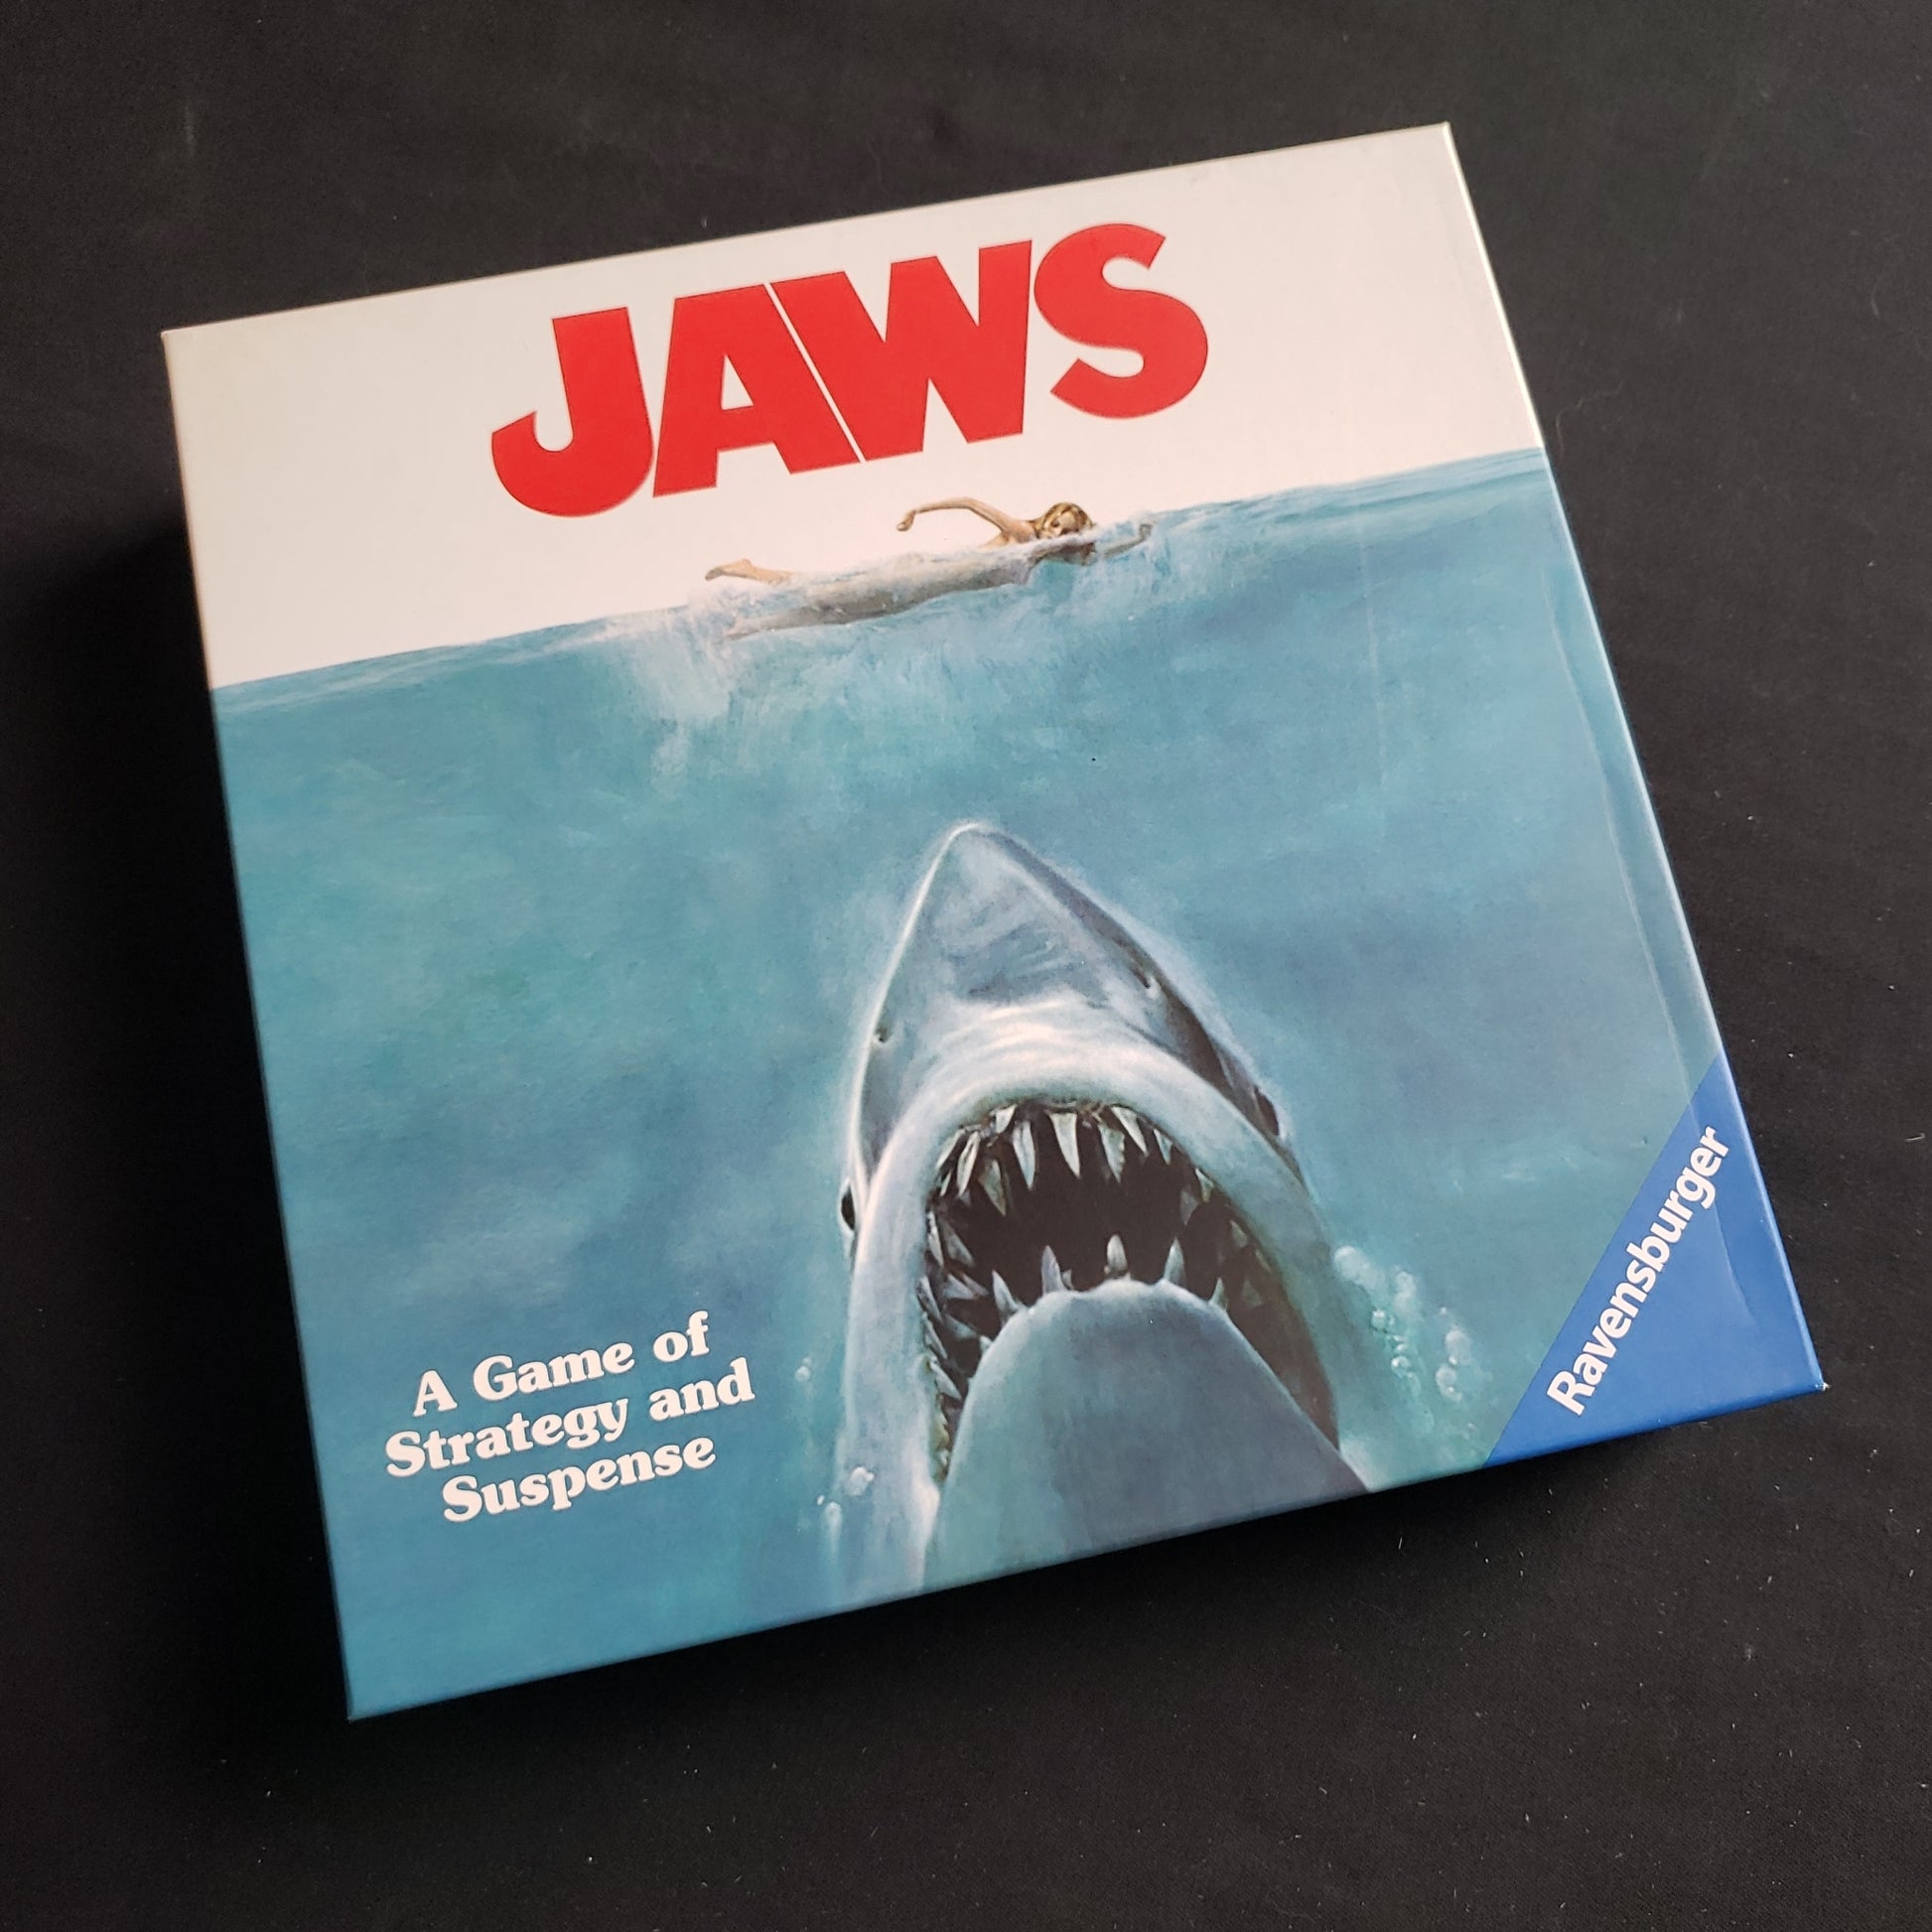 Image shows the front cover of the box of the Jaws board game